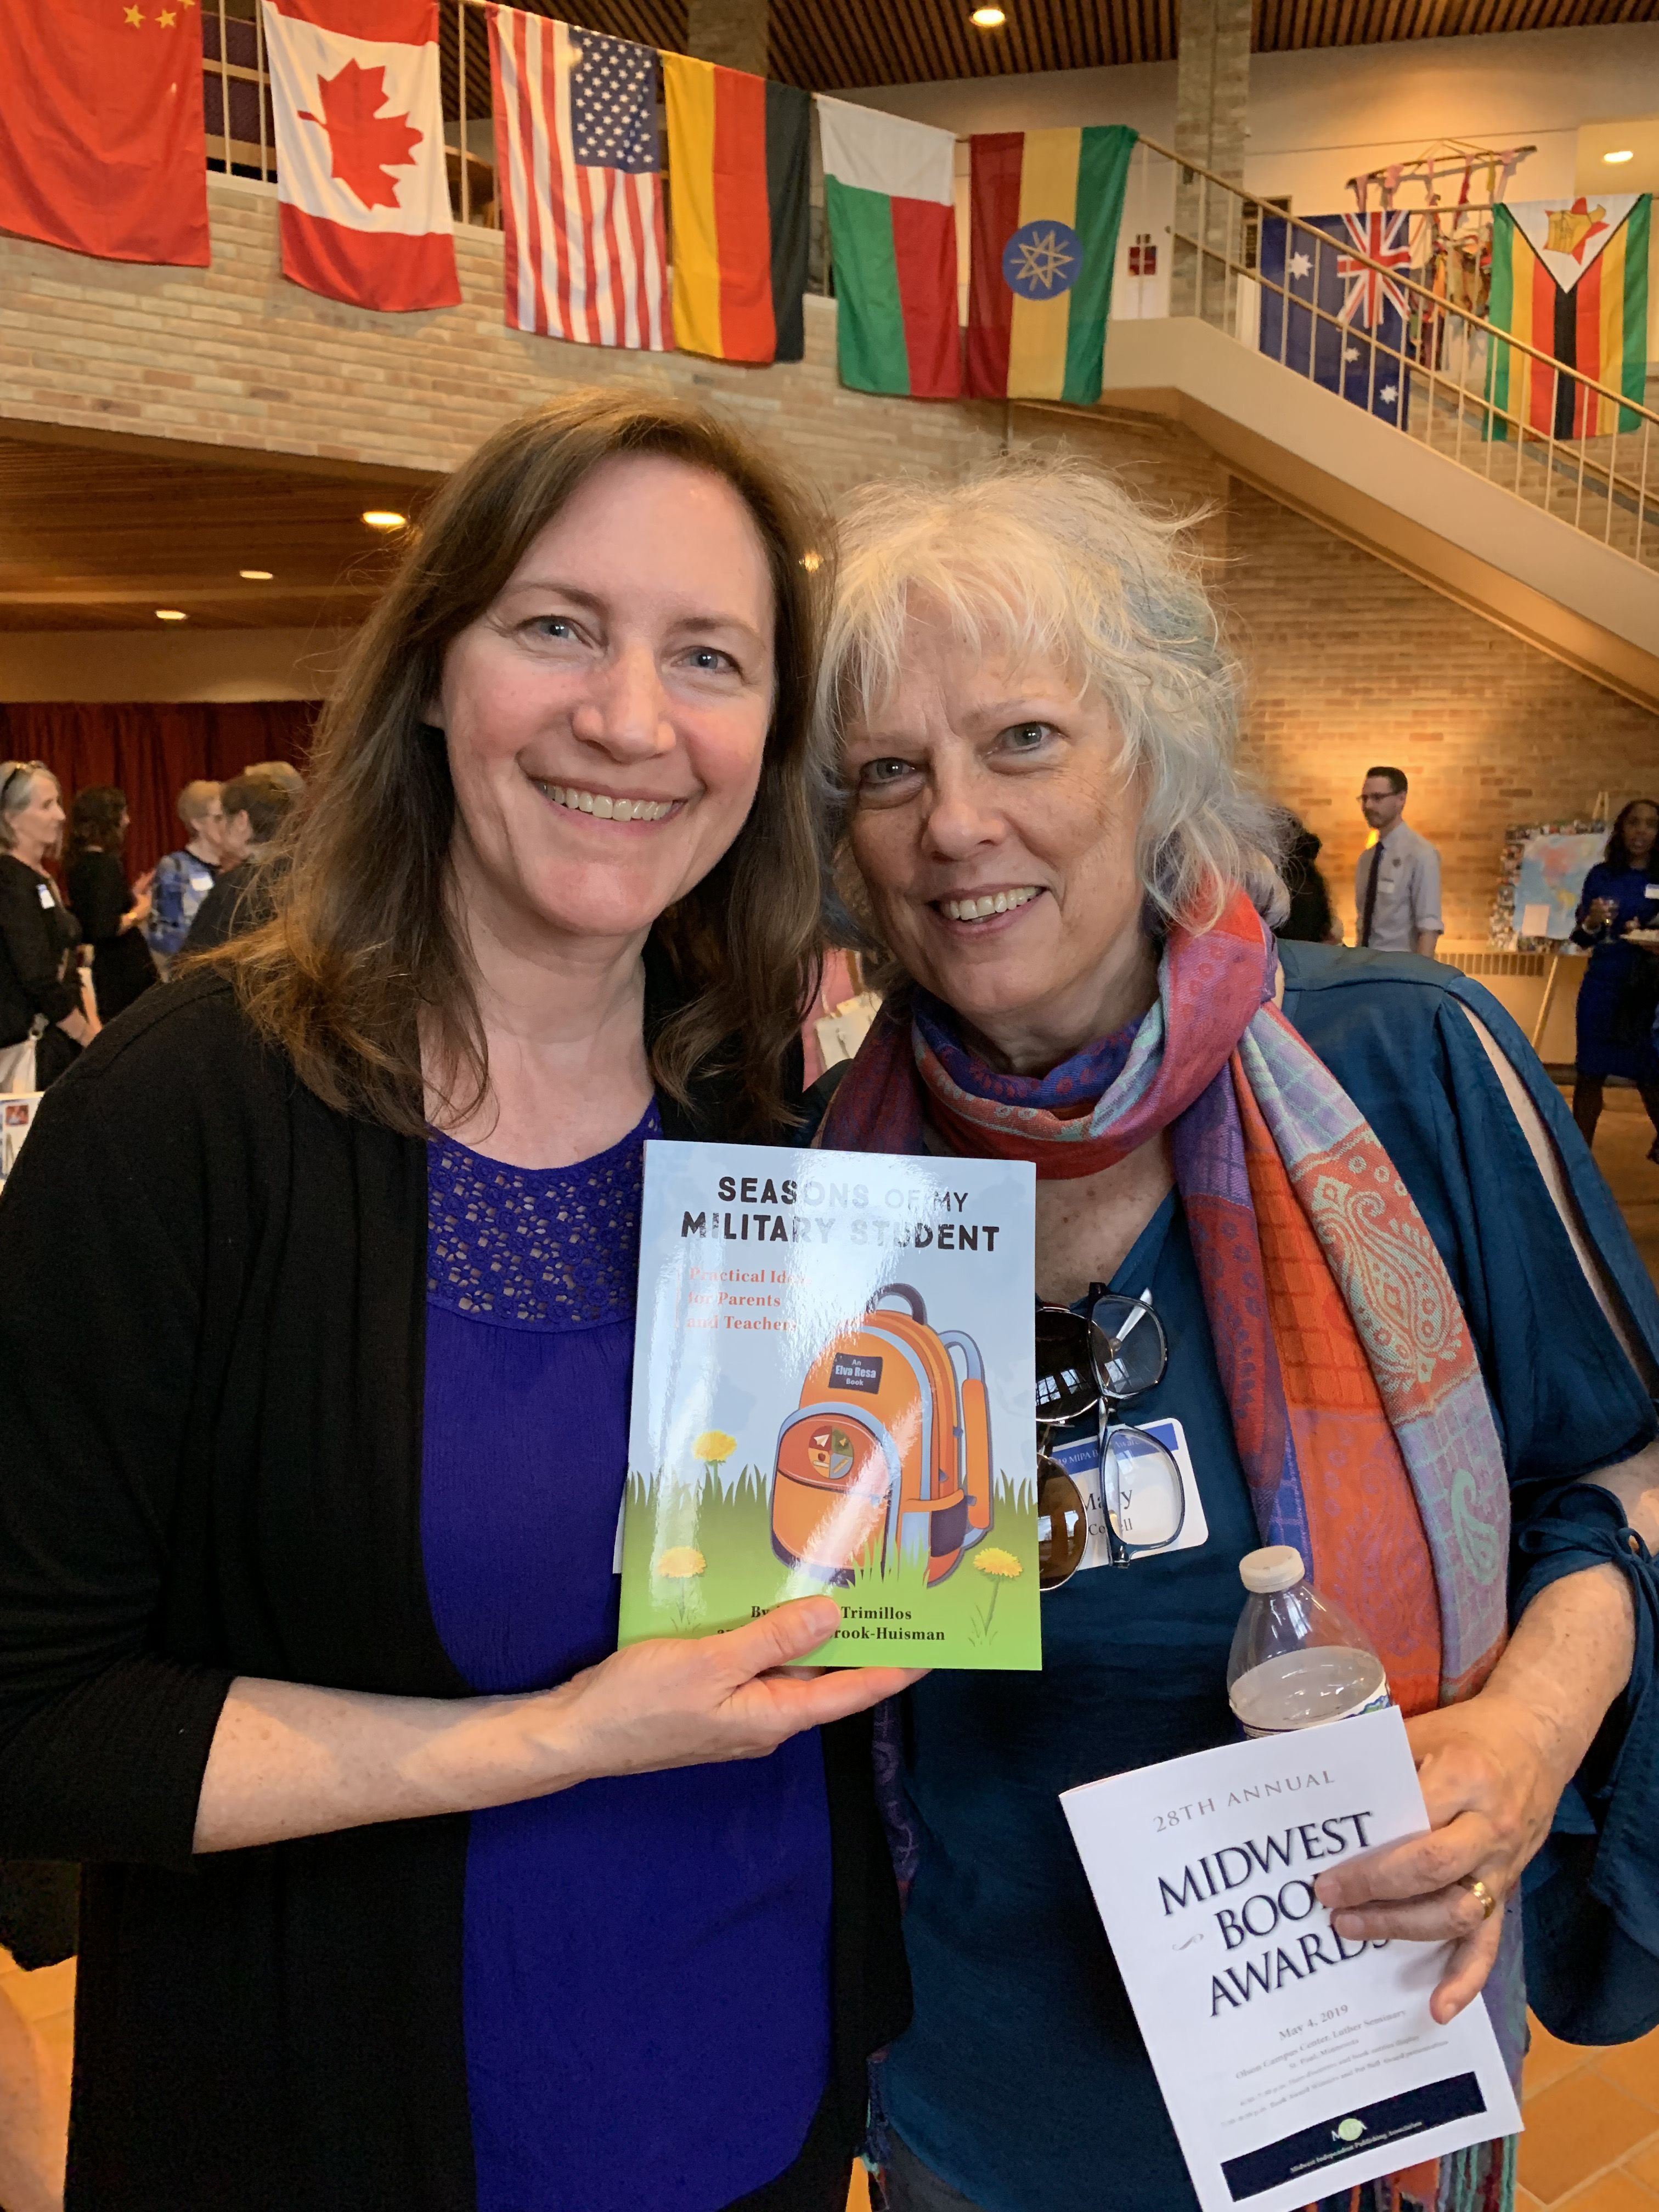 Karen Pavlicin-Fragnito and Marly Cornell attended the Midwest Book Awards in St Paul May 4, where Seasons of My Military Student earned a finalist distinction.